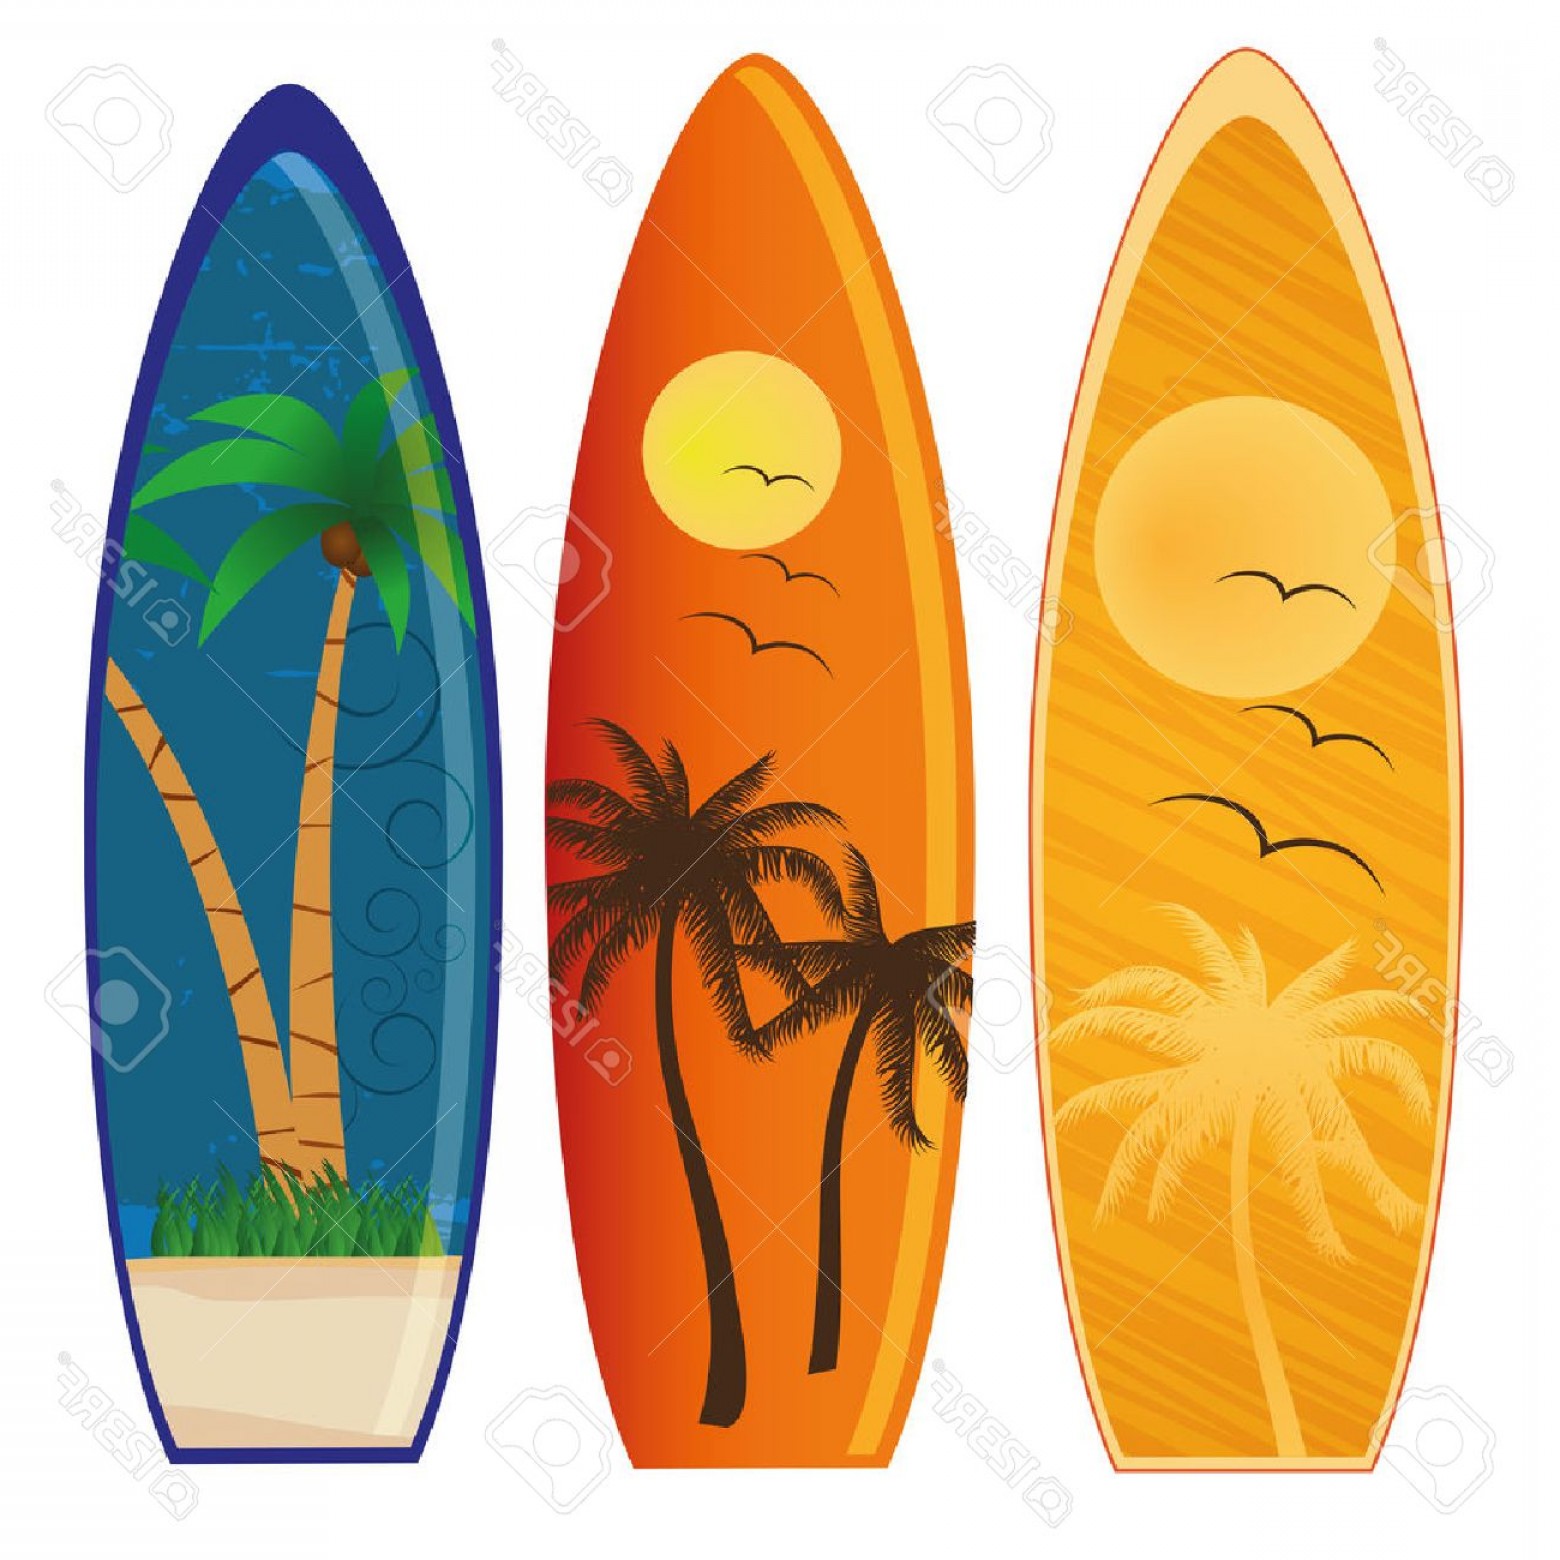 Photothree colored surfboards.